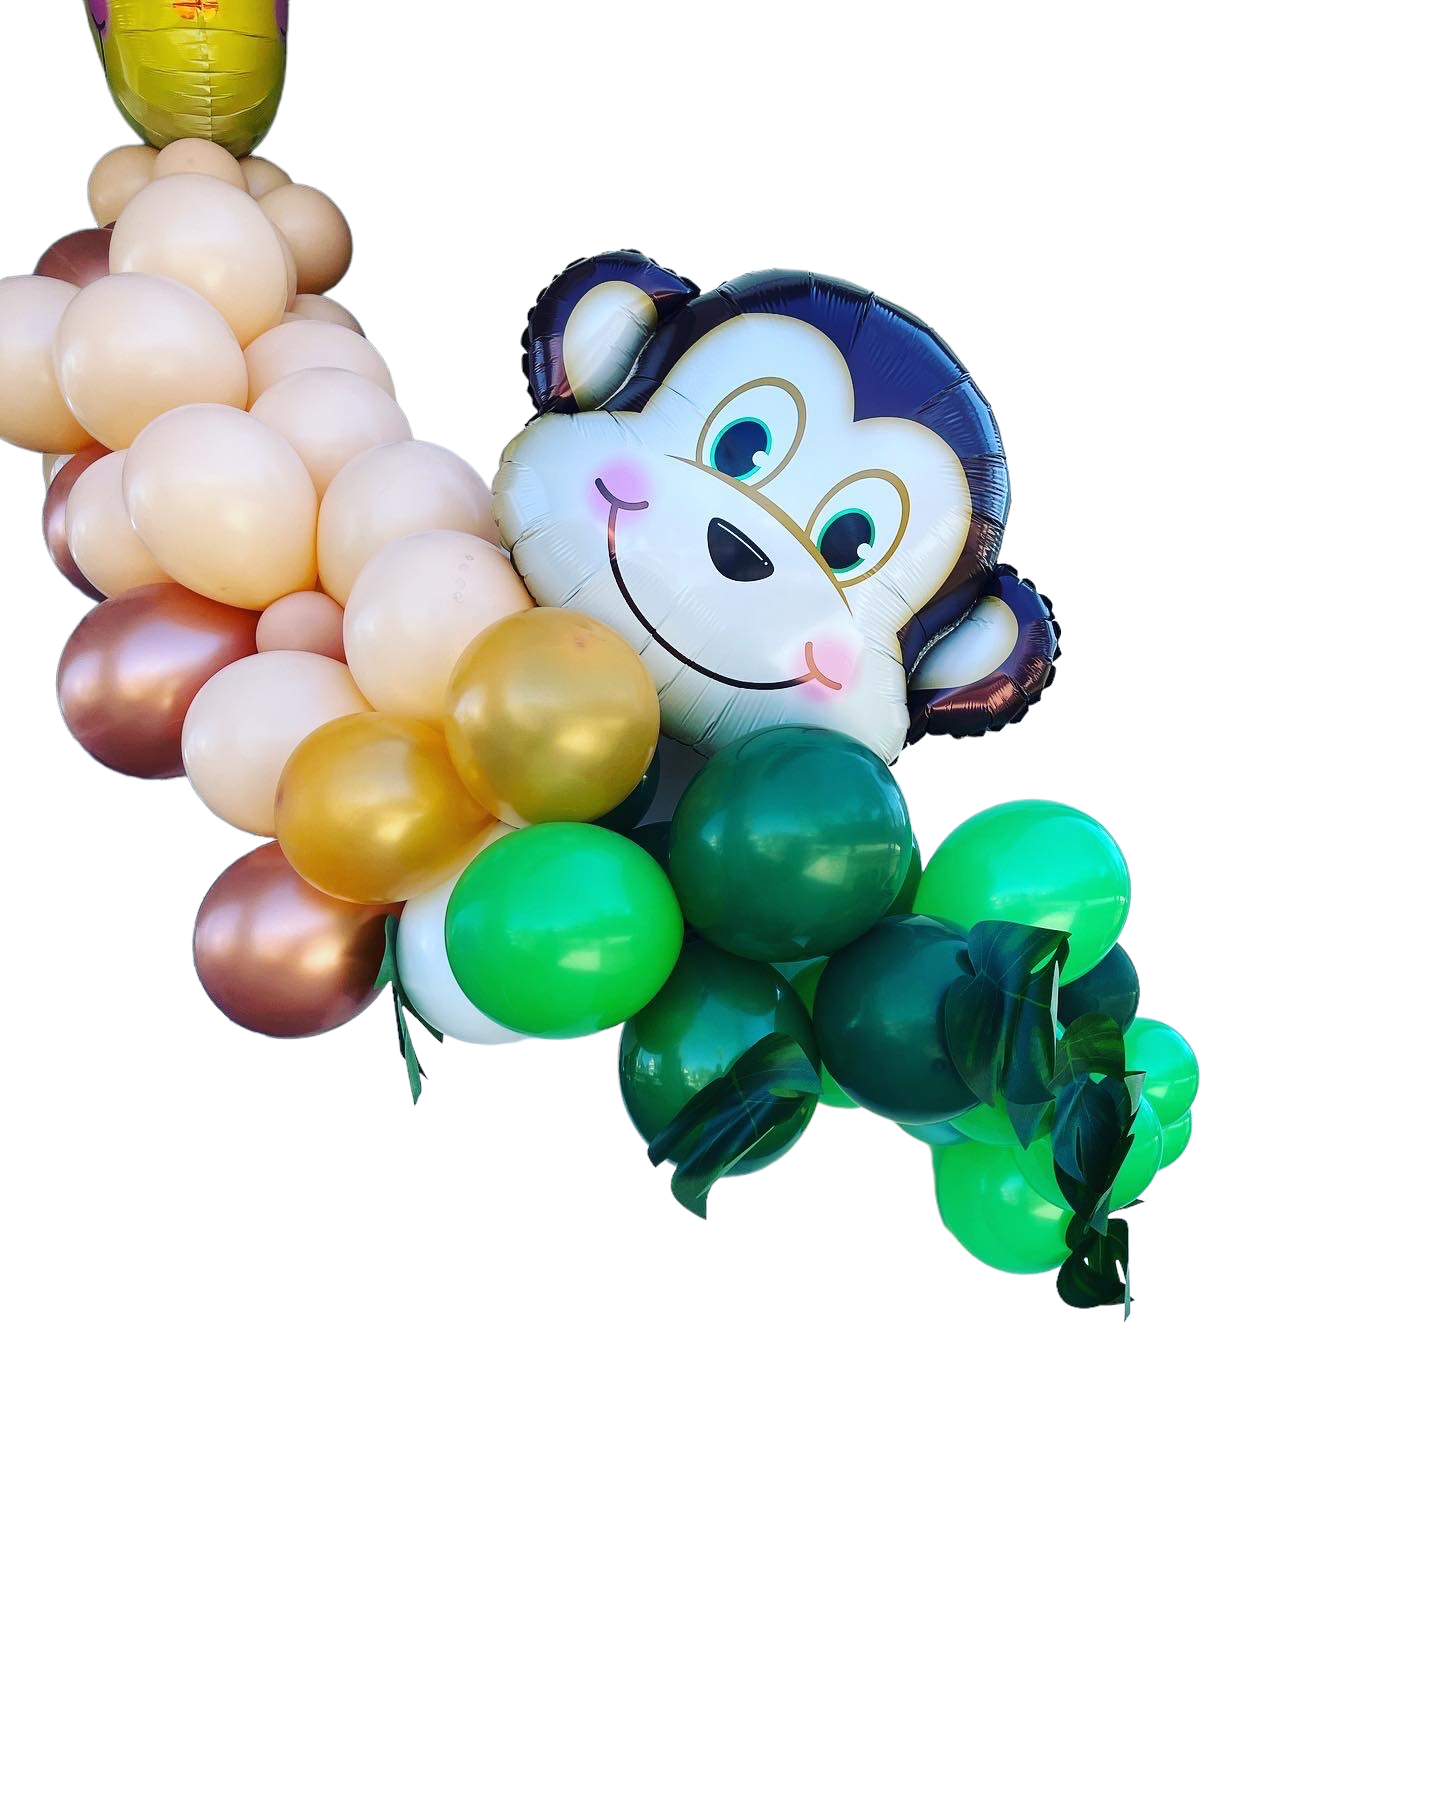 A bunch of balloons in the shape of a monkey